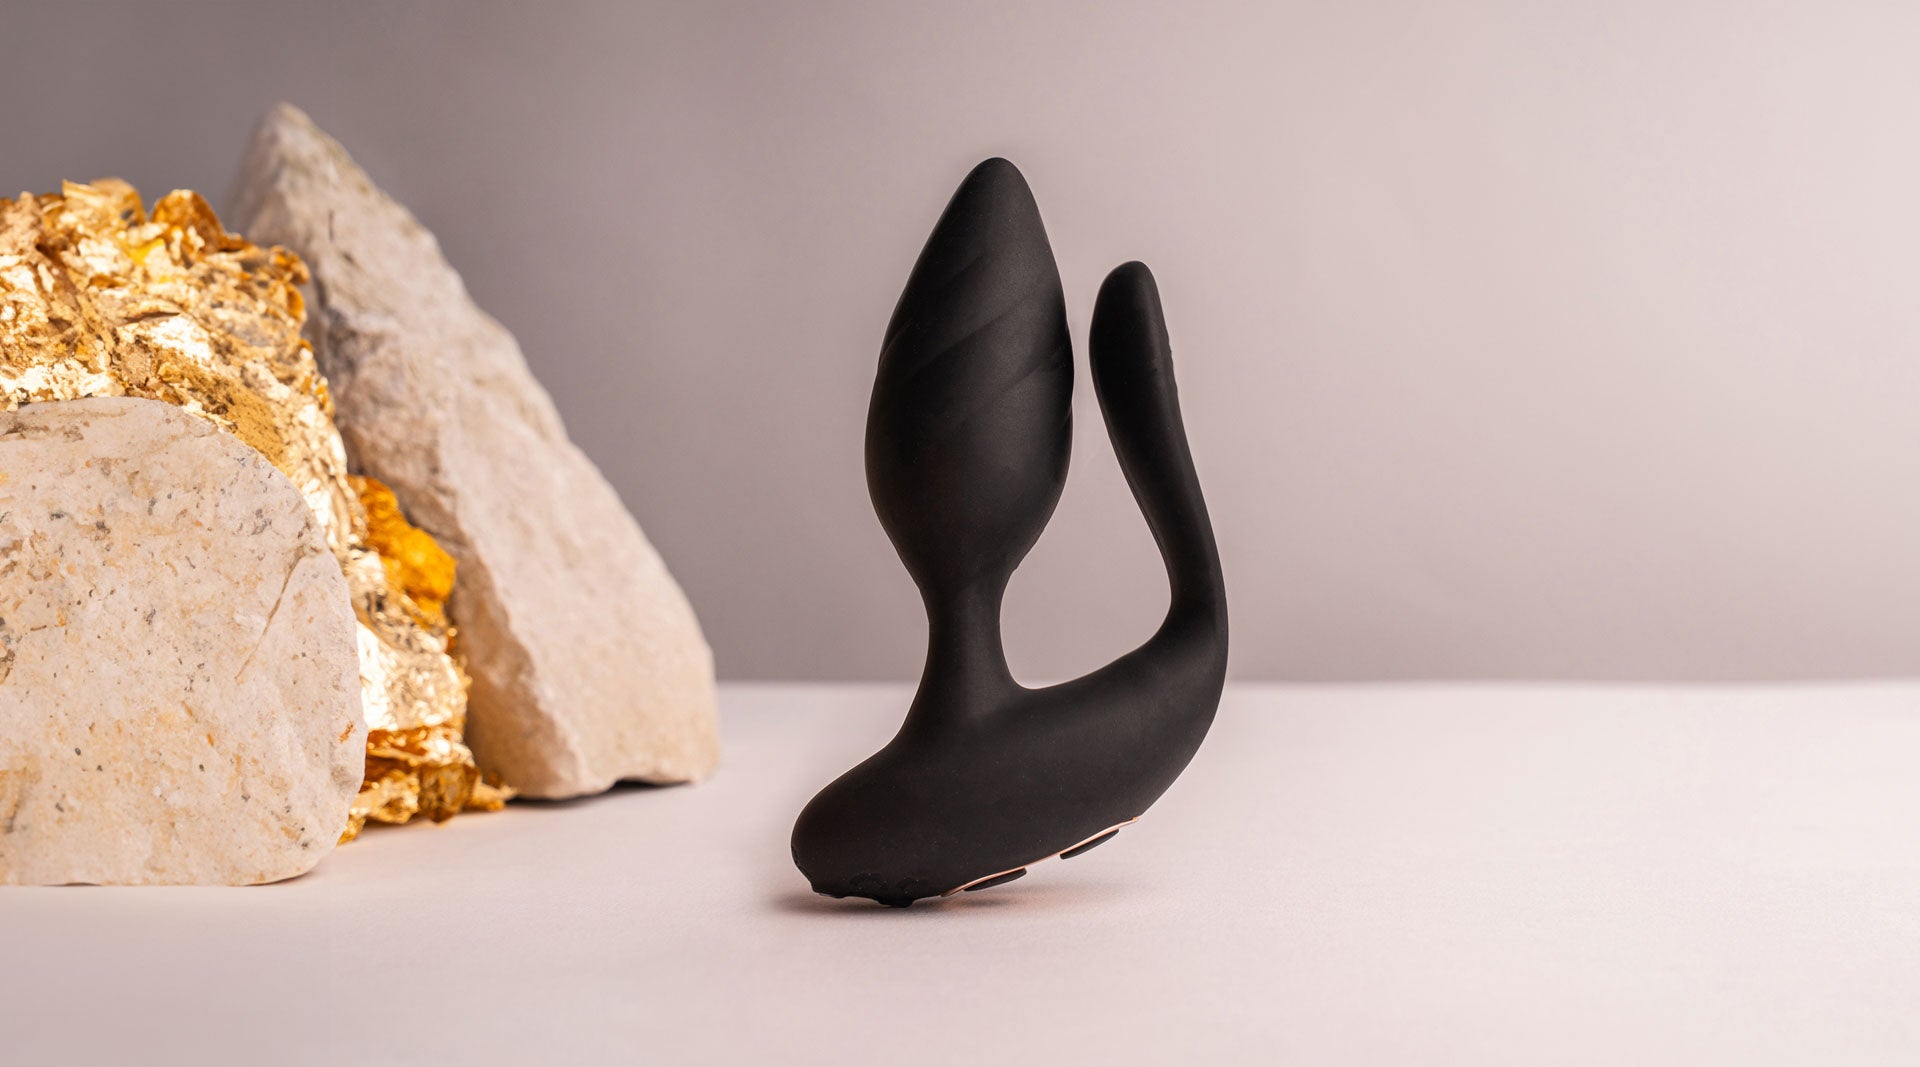 Black silicone butt plug with an insertable vaginal tail.